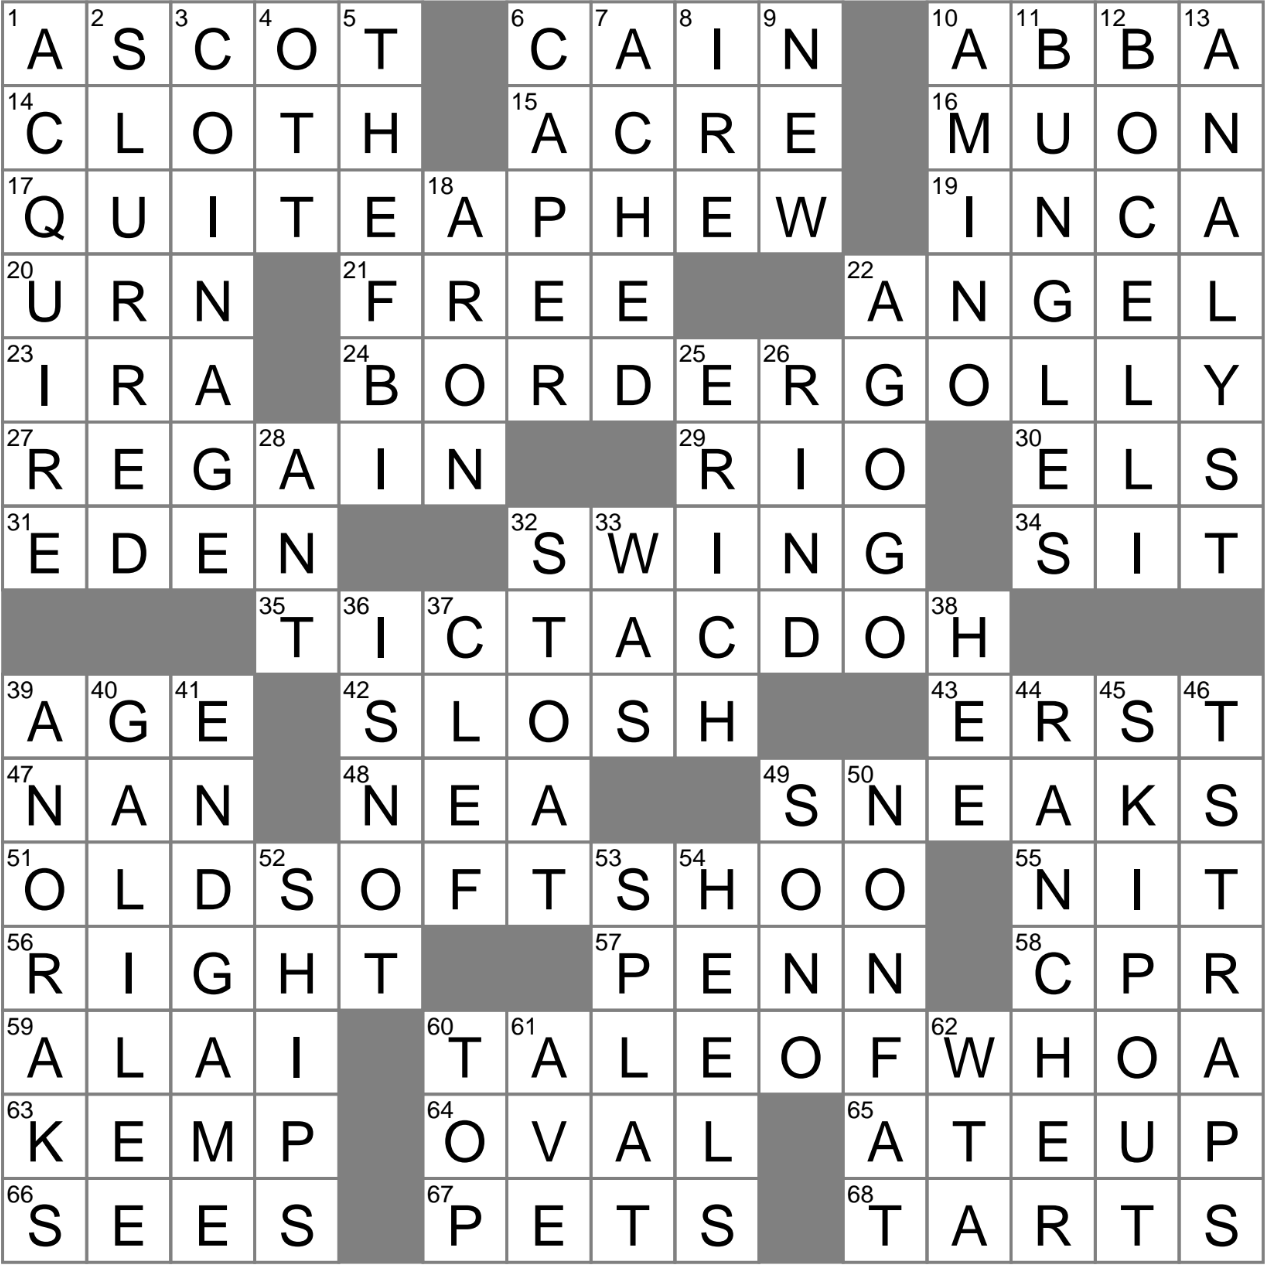 invent a word or phrase crossword clue